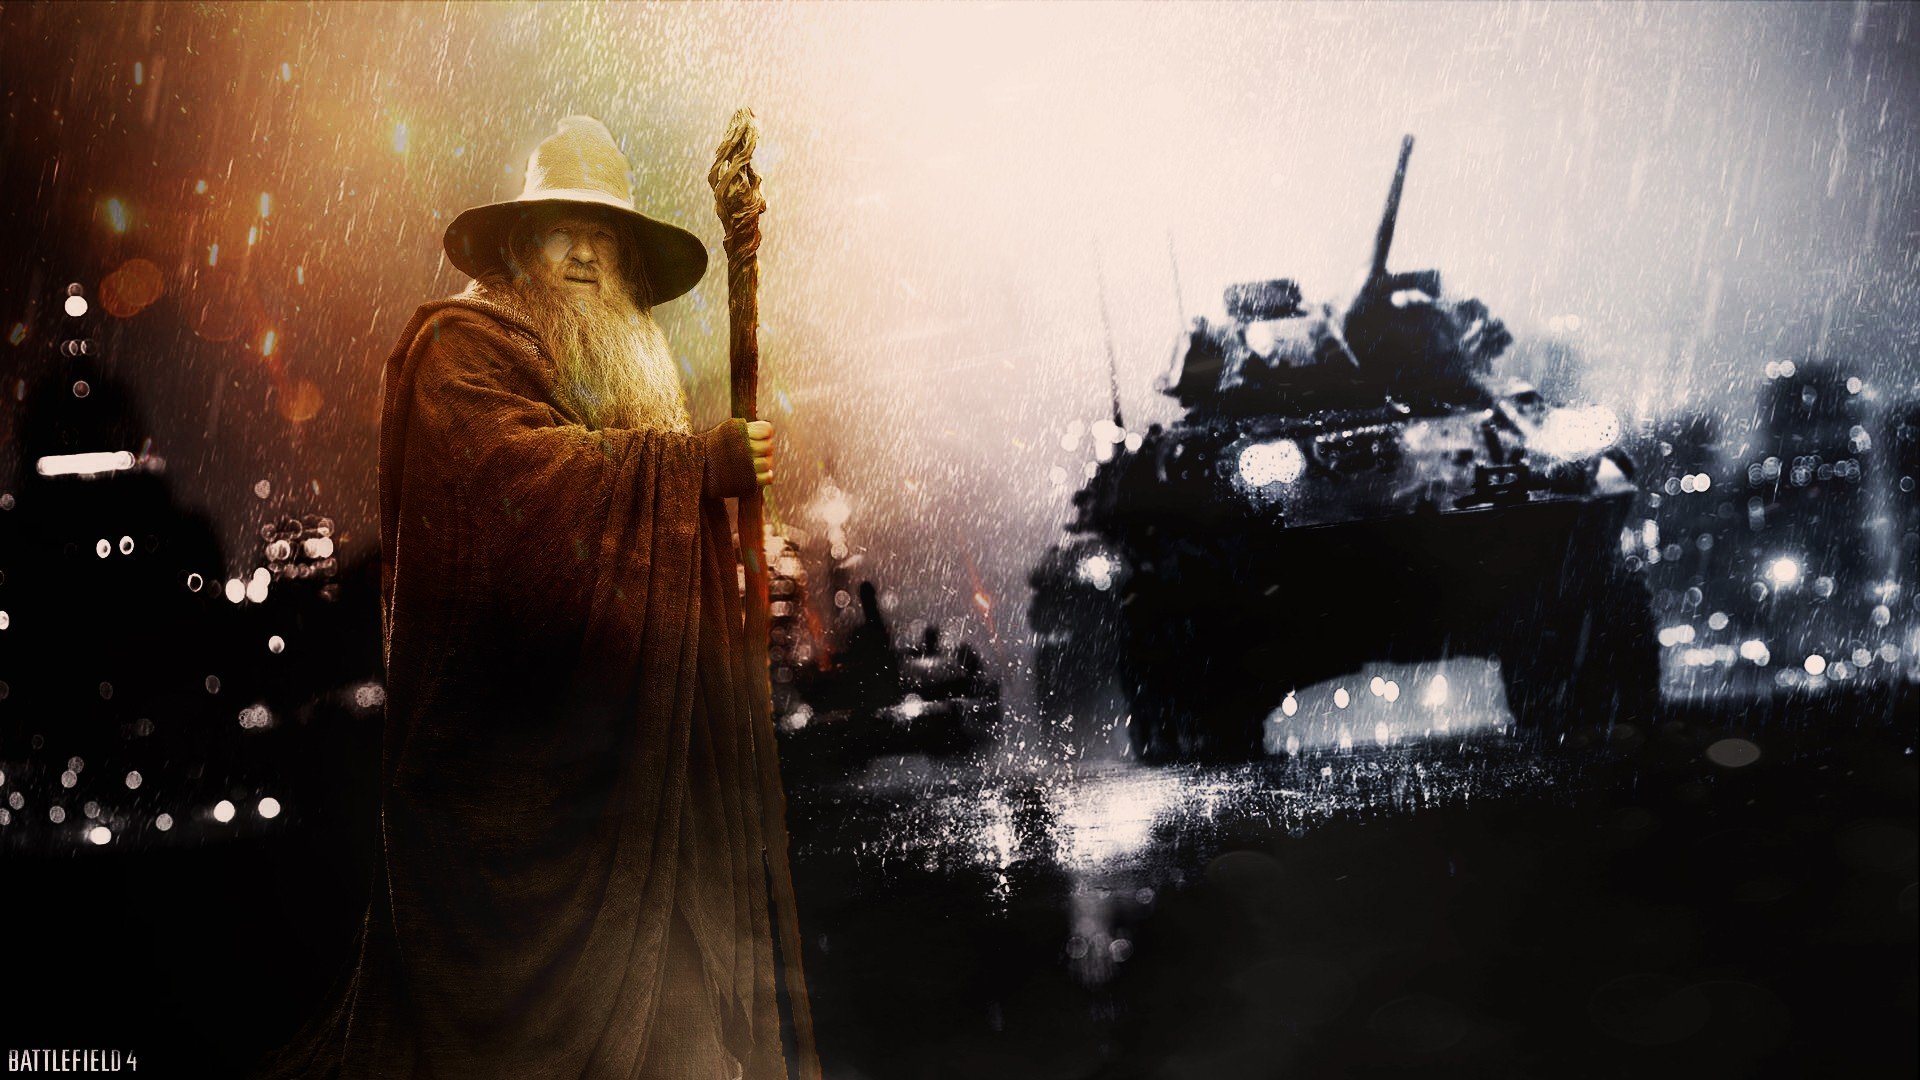 Gandalf, Battlefield, Battlefield 4, The Lord of the Rings, Video games Wallpaper